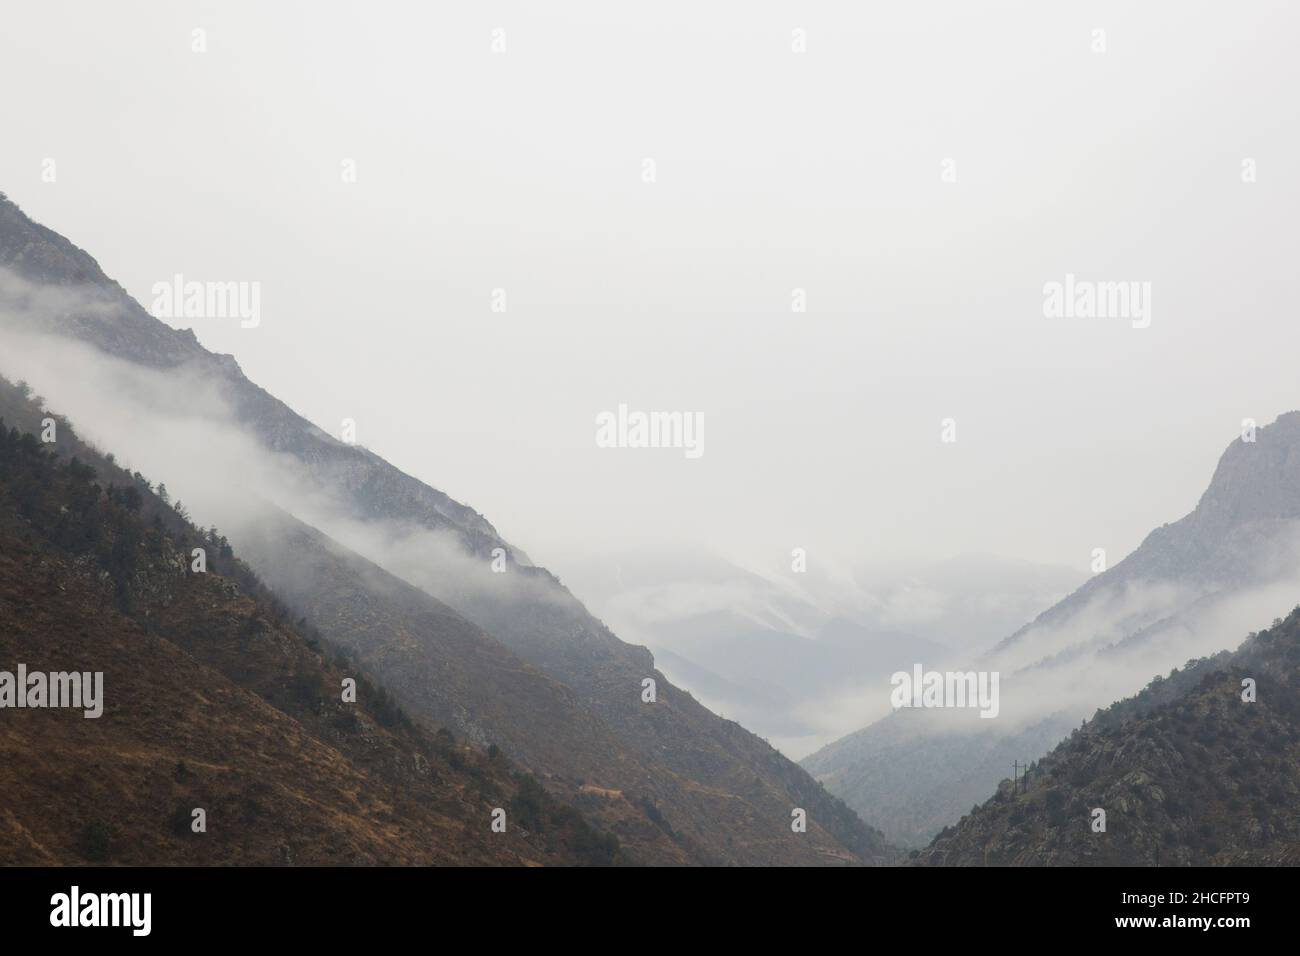 Mountain View has a beautiful morning mist. Stock Photo